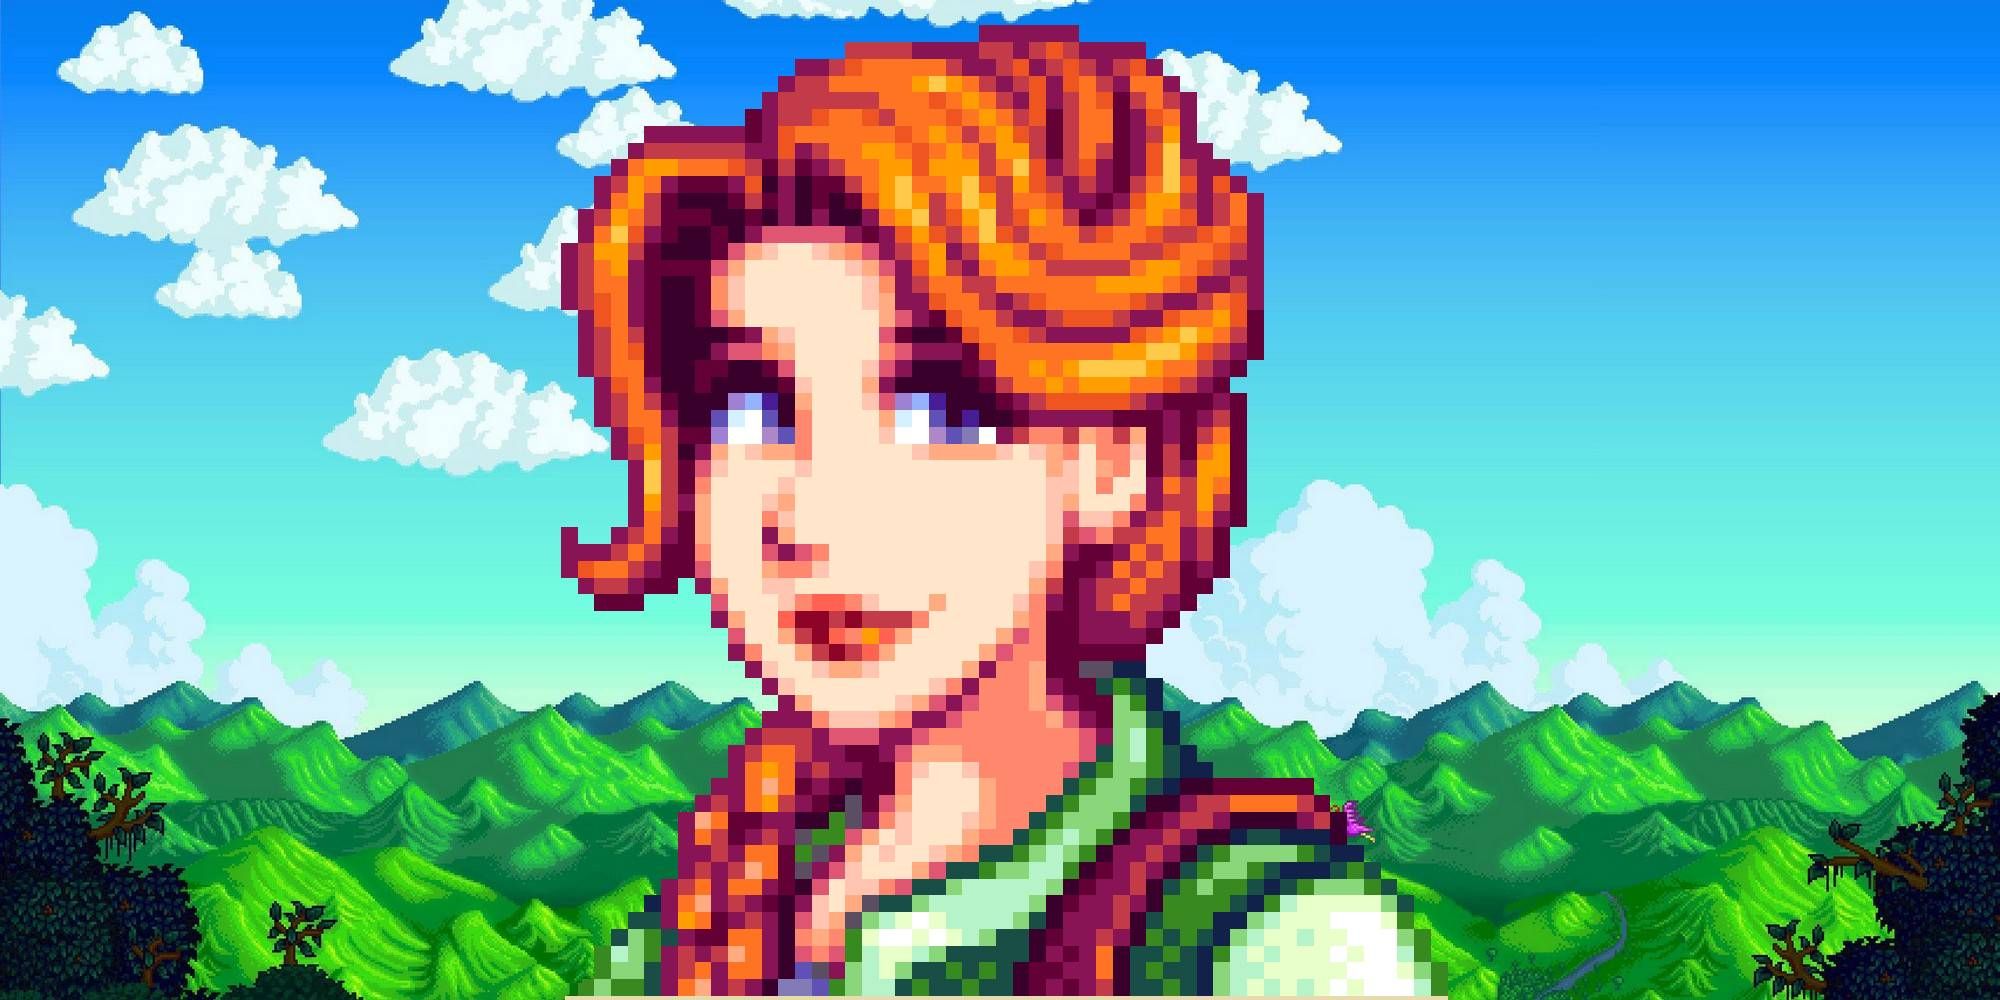 leah on the stardew valley title background marriage